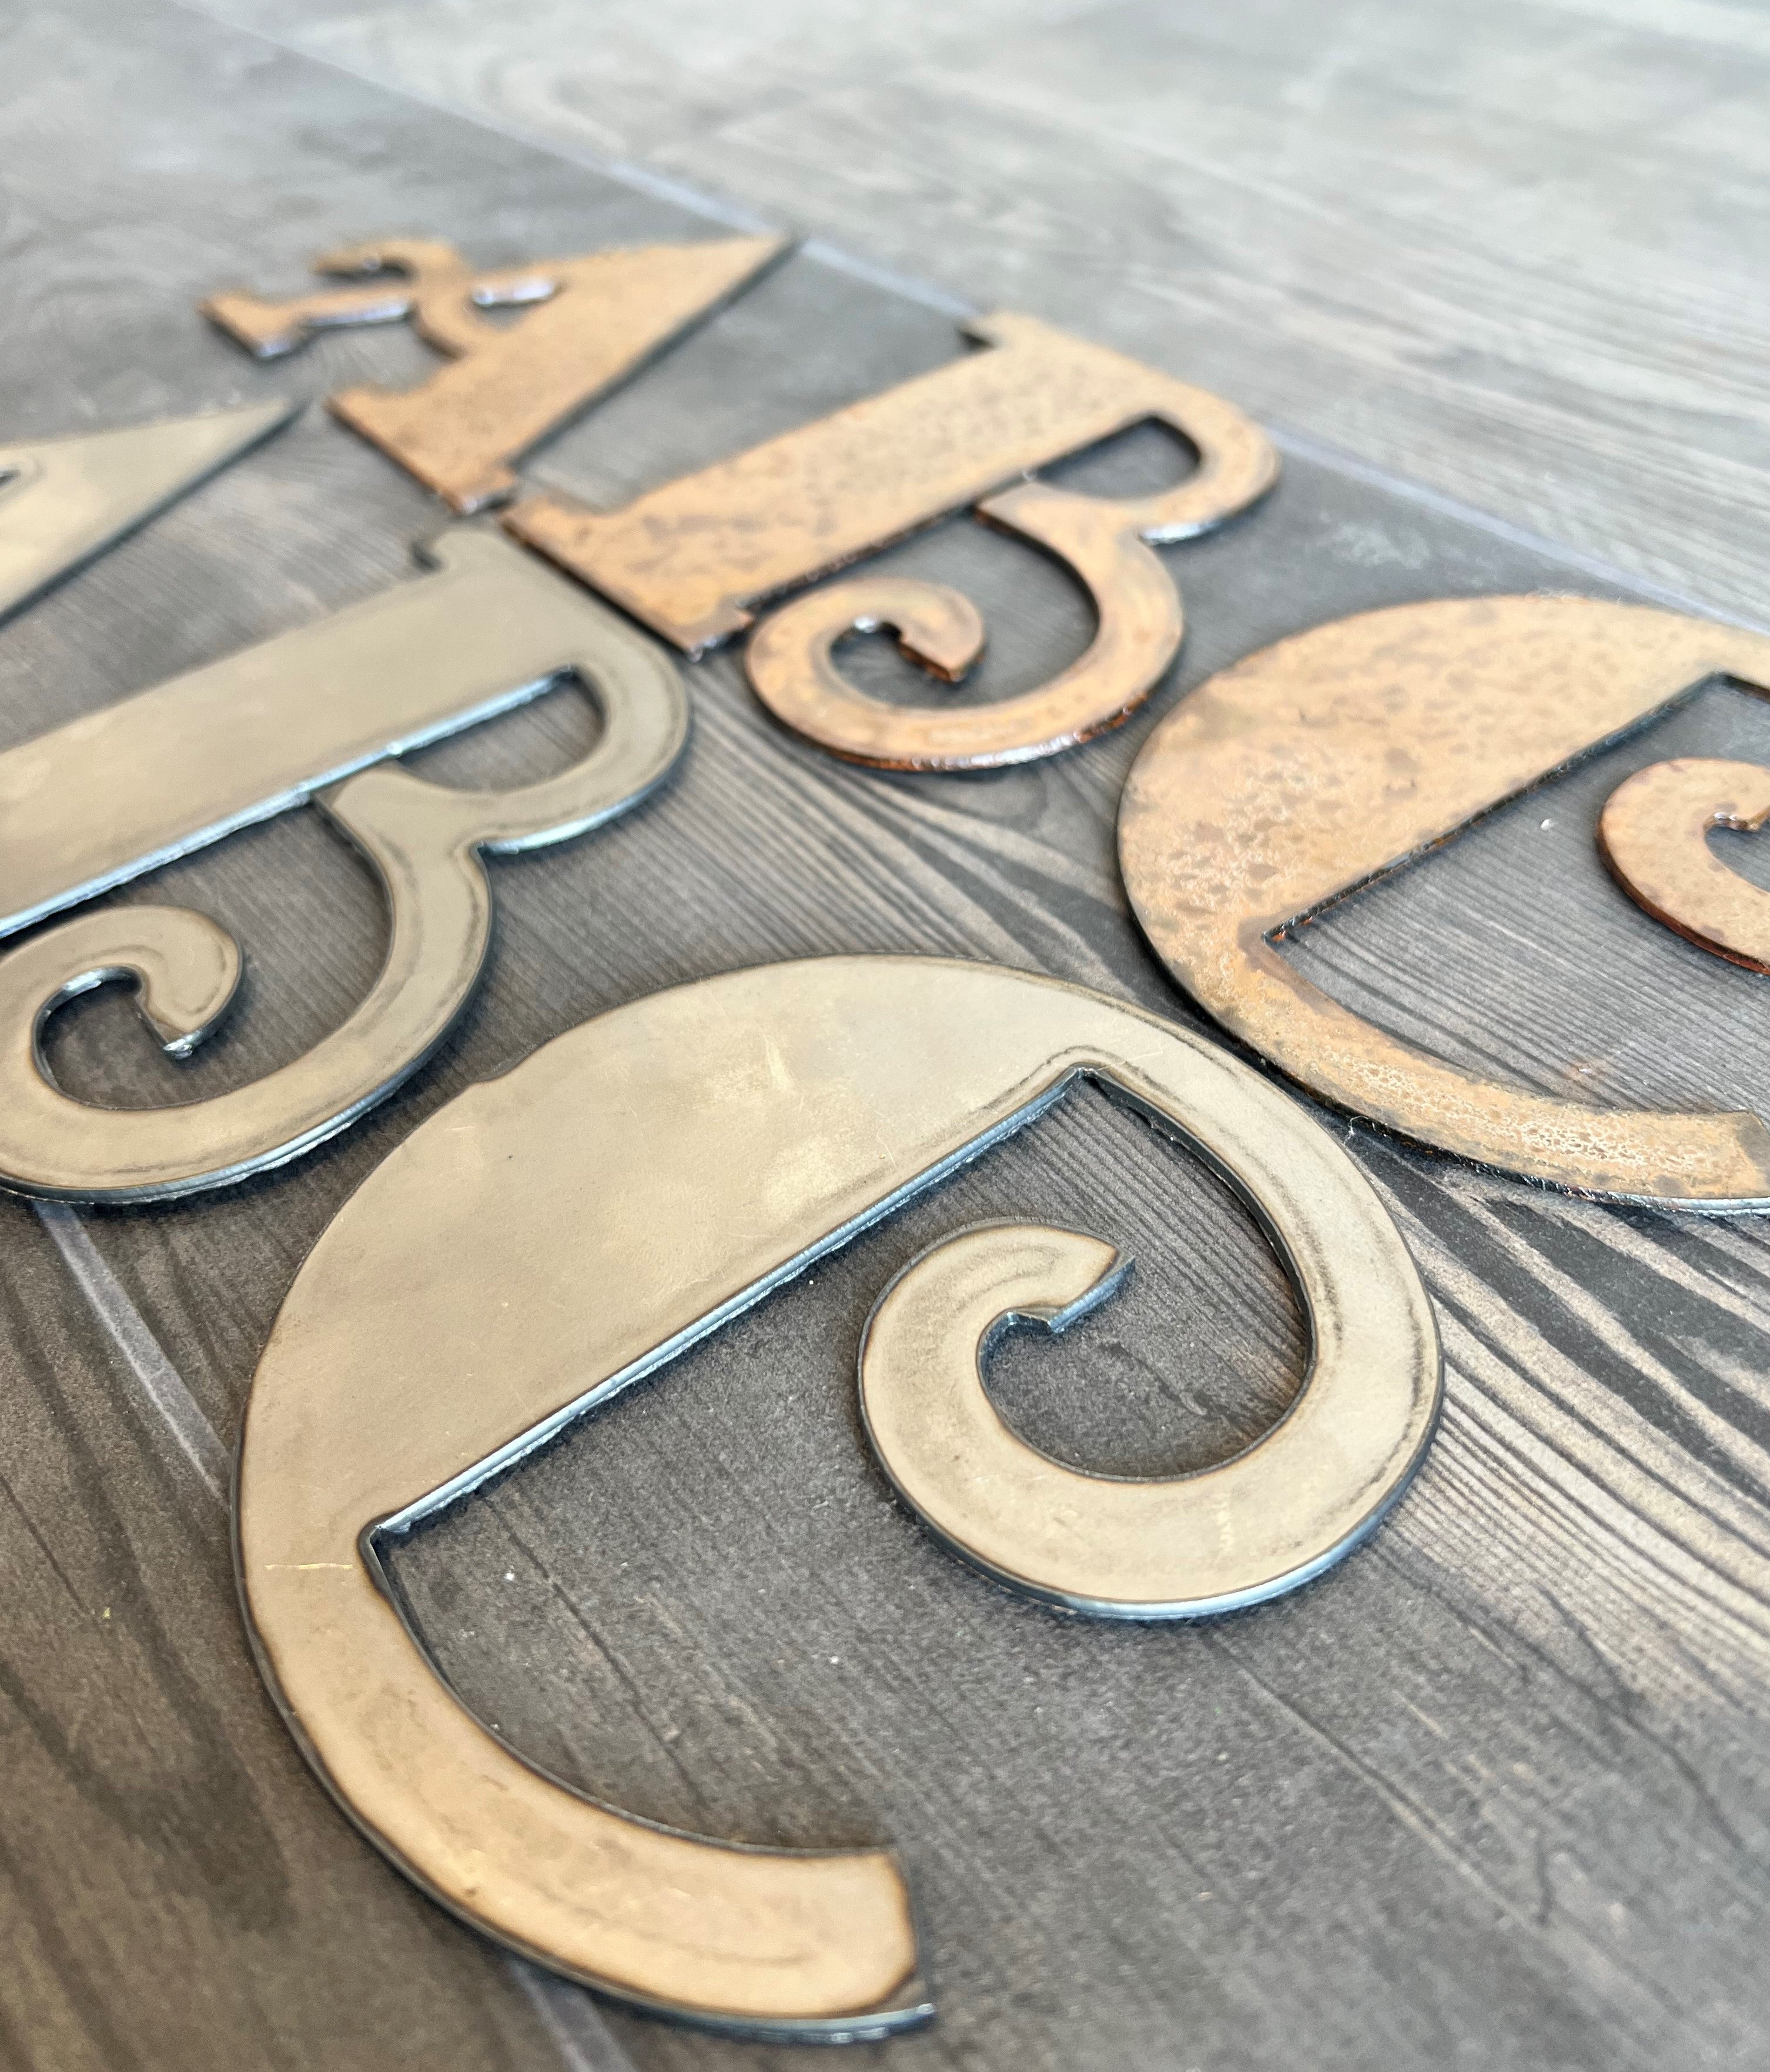 6 inch Metal Numbers and Letters- Rusty or Natural Steel Finish Rusty Finish / Non Drilled | Weathered Finishes